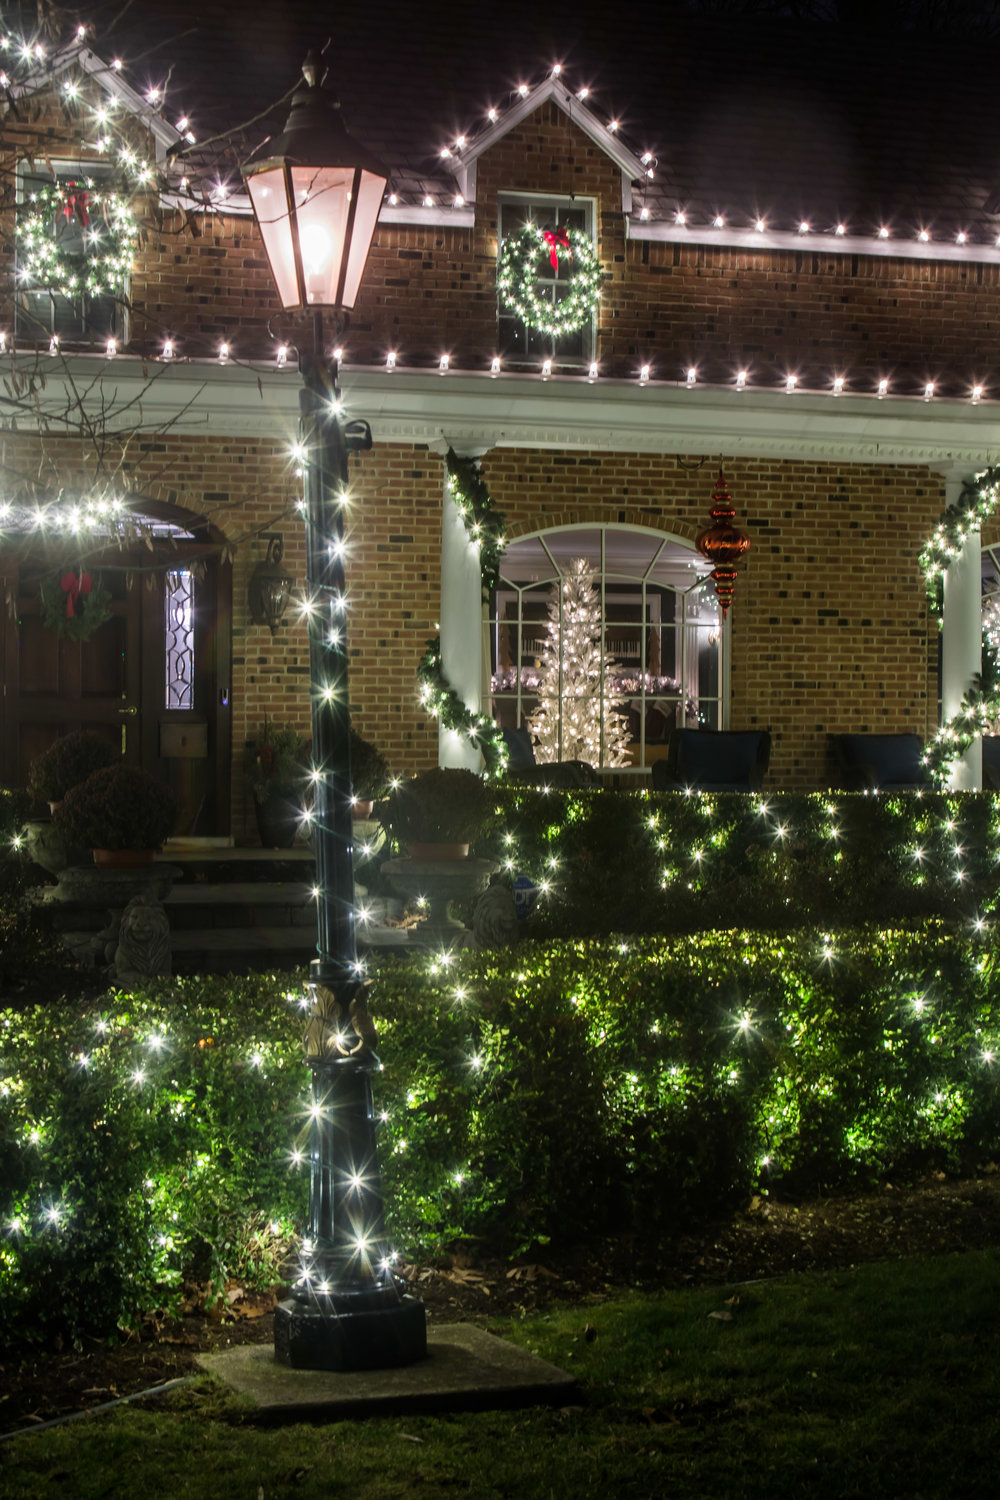 The Glencairn neighborhood of East Lansing has many examples of holiday decorations that complement the historic architecture of the area.